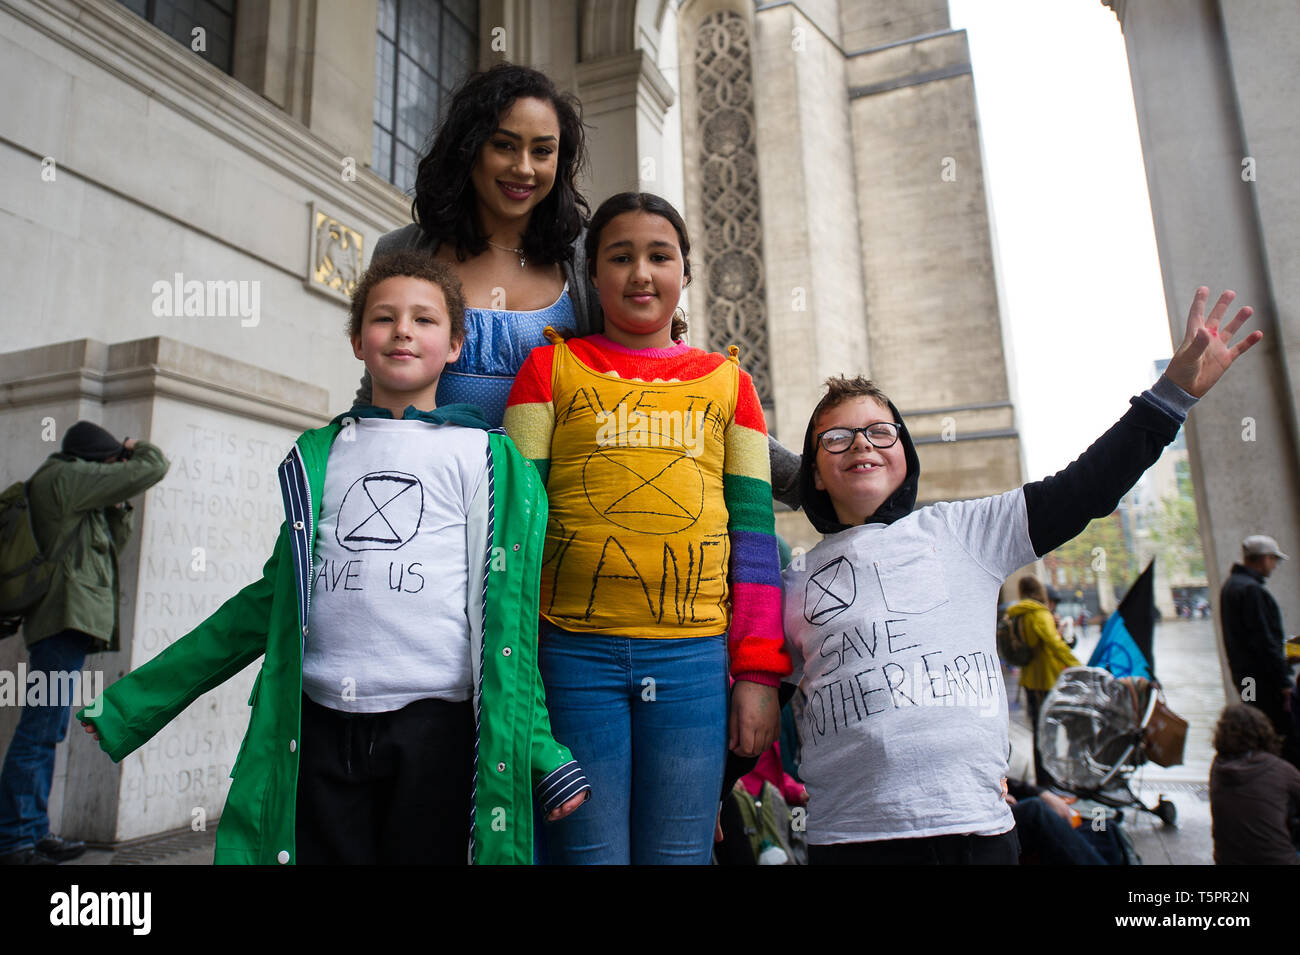 Manchester, UK. 26th Apr, 2019. Young activists seen wearing handmade protest t-shirts during the weekly Extinction Rebellion protest outside Manchester Central Library.Extinction Rebellion is a socio-political movement which uses nonviolent resistance to protest against climate breakdown, biodiversity loss, and the risk of human extinction and ecological collapse. Credit: Steven Speed/SOPA Images/ZUMA Wire/Alamy Live News Stock Photo